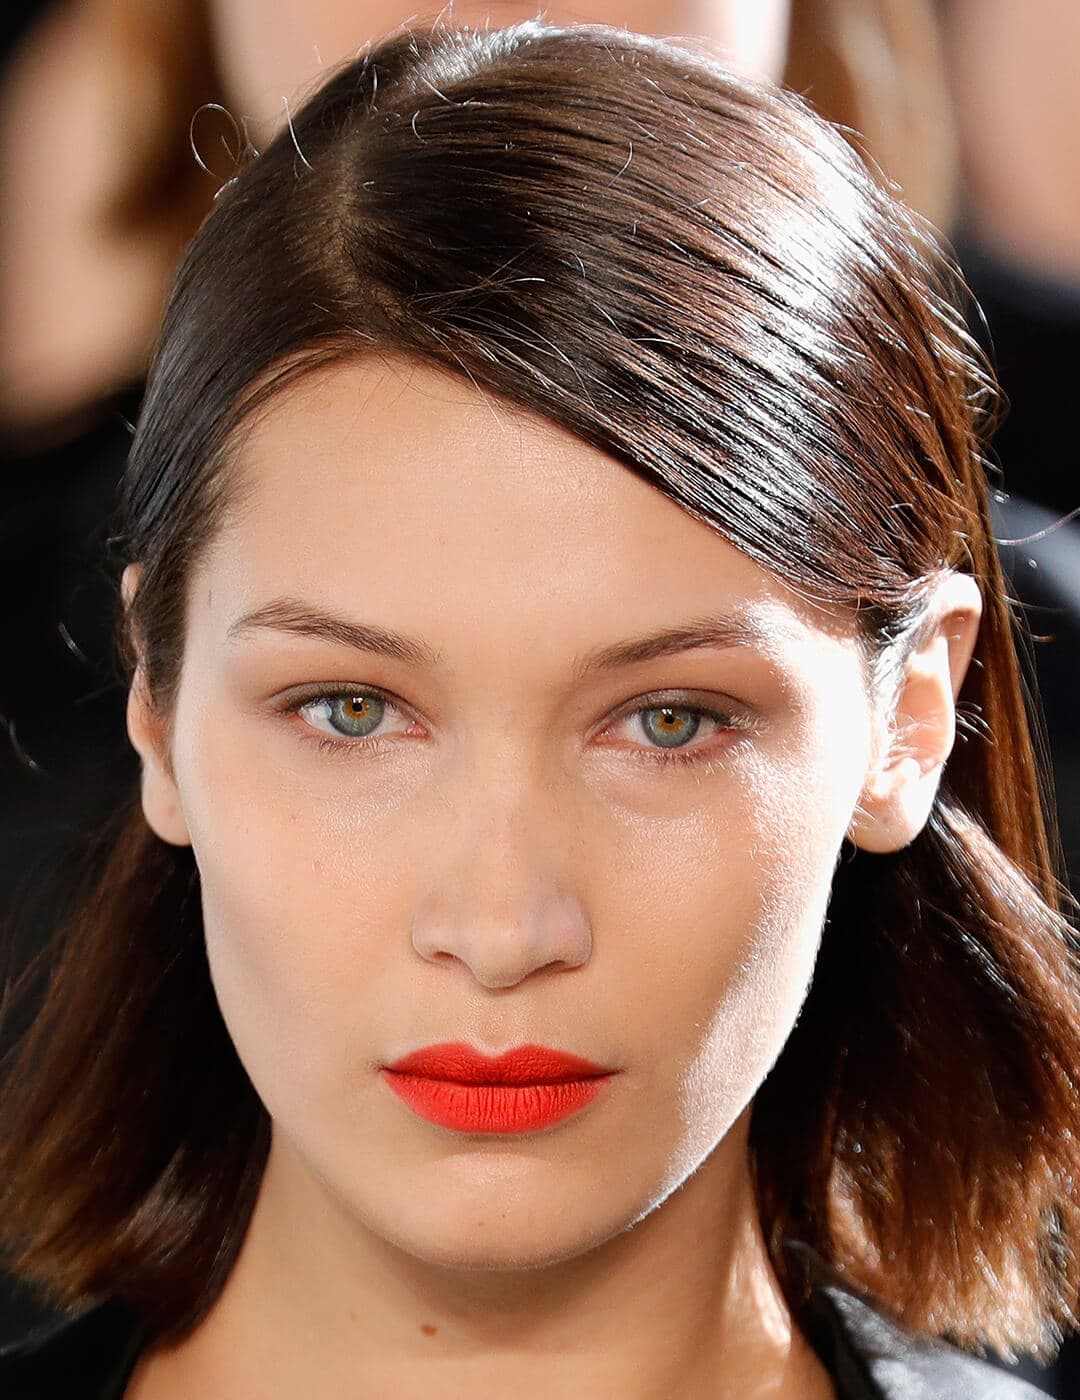 Bella Hadid rocking a clean makeup look paired with bold red lips